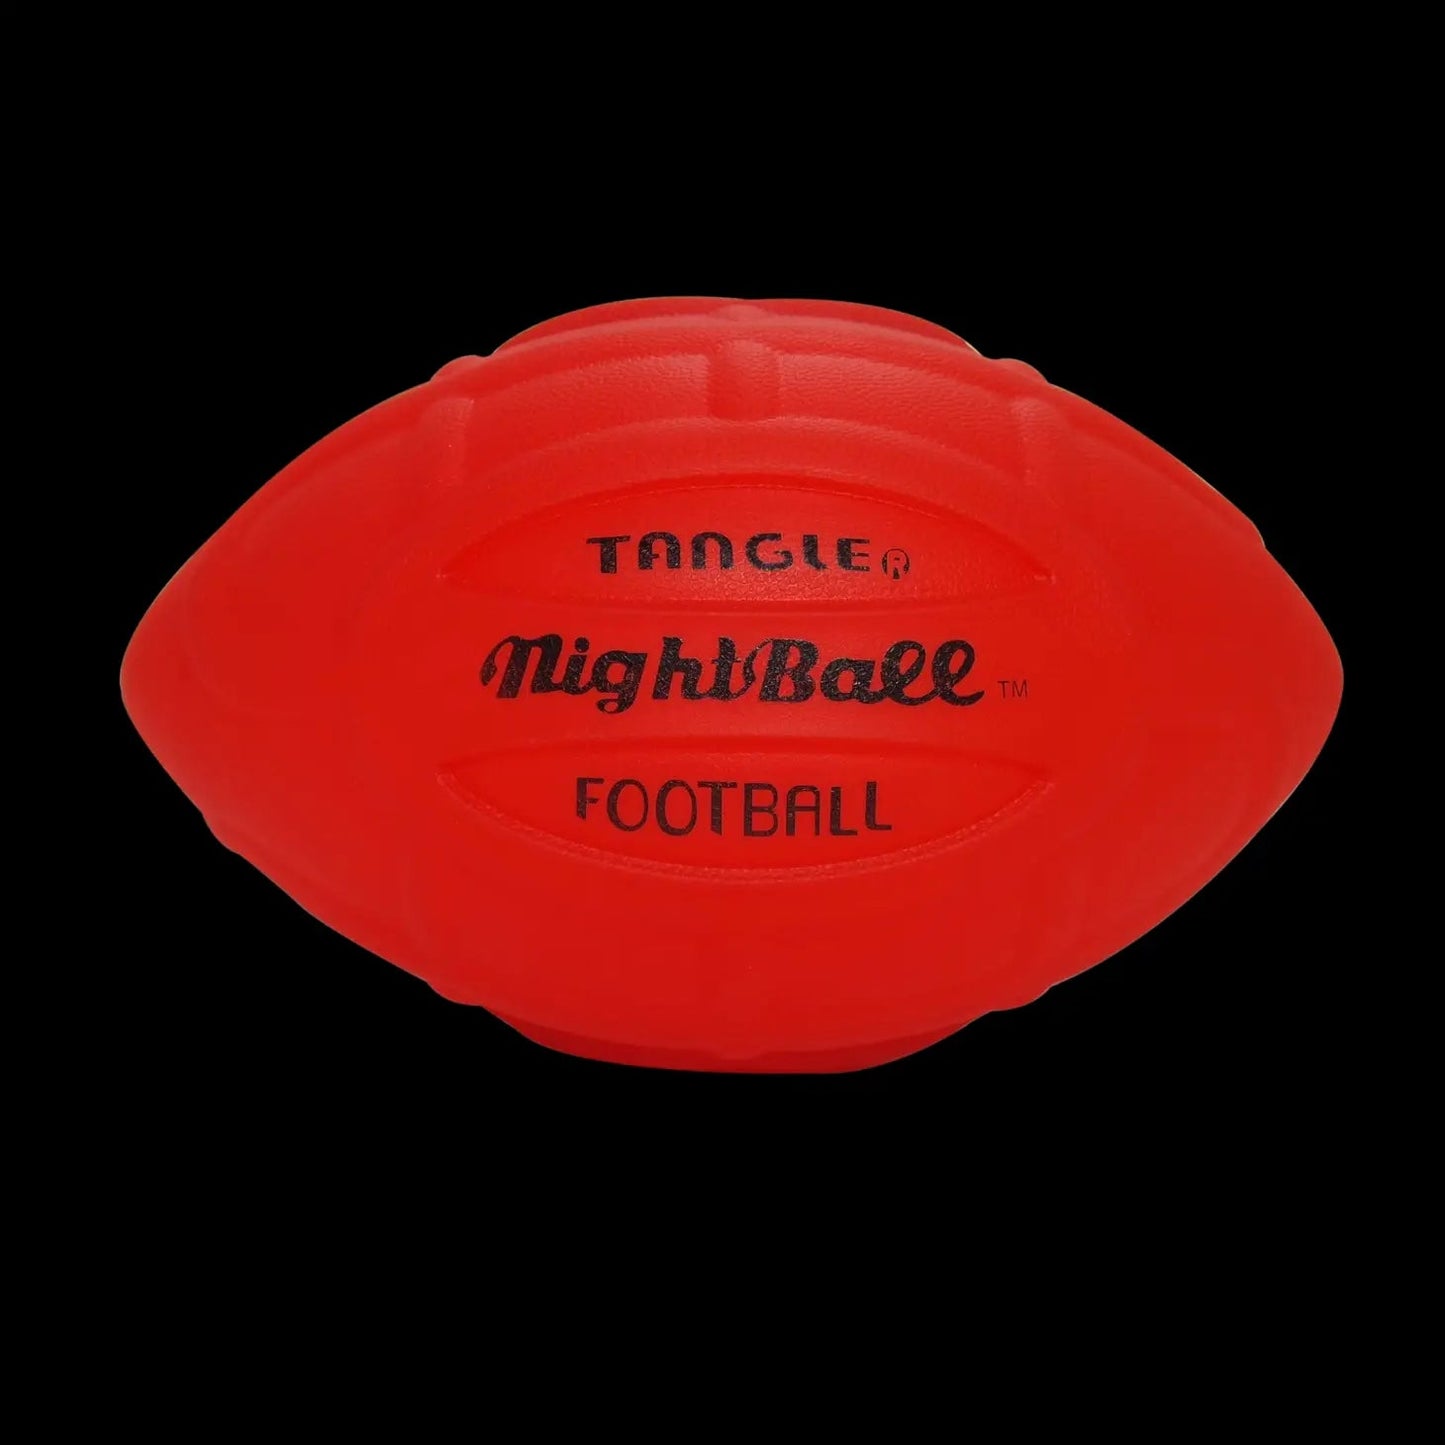 Nightball Football 196 TOYS CHILD Tangle Creations Red 